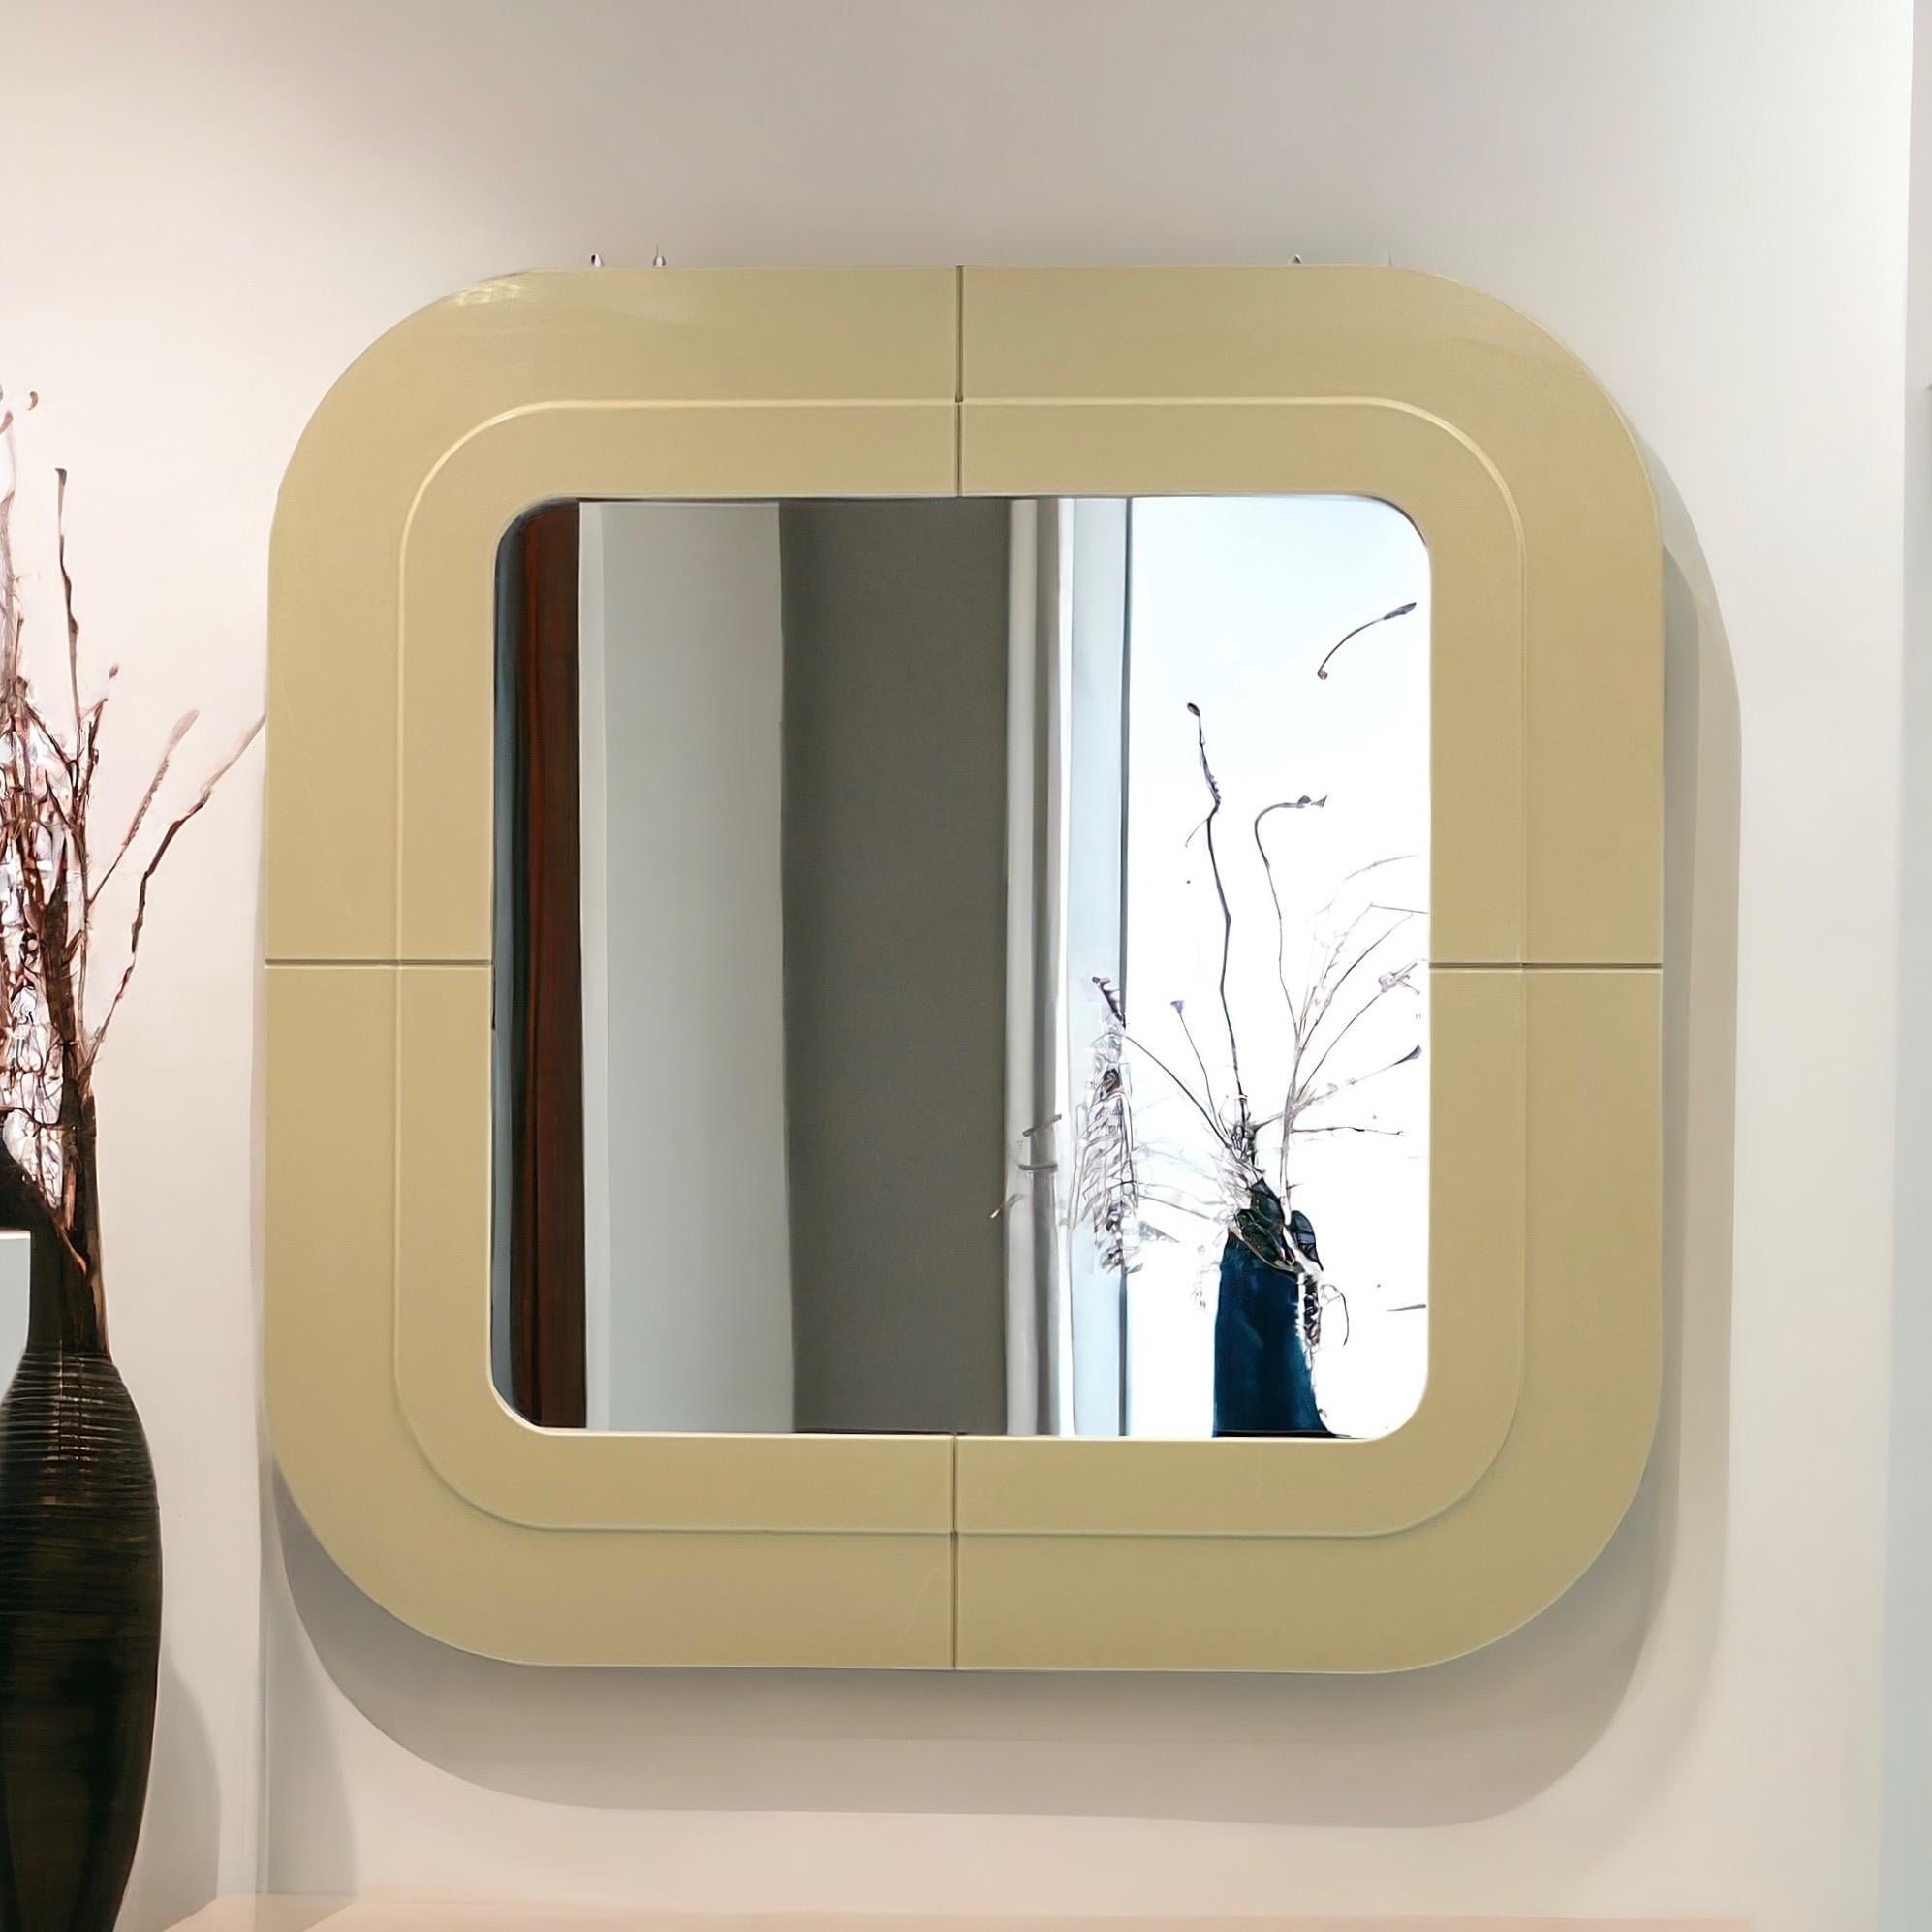 Beautiful and iconic patent design Vintage Kartell Mirror in off white, designed by Anna Castelli Ferrieri in the 60s.

This mid-century modern masterpiece features a squared frame with elegantly curved angles, made from glossy off-white plastic